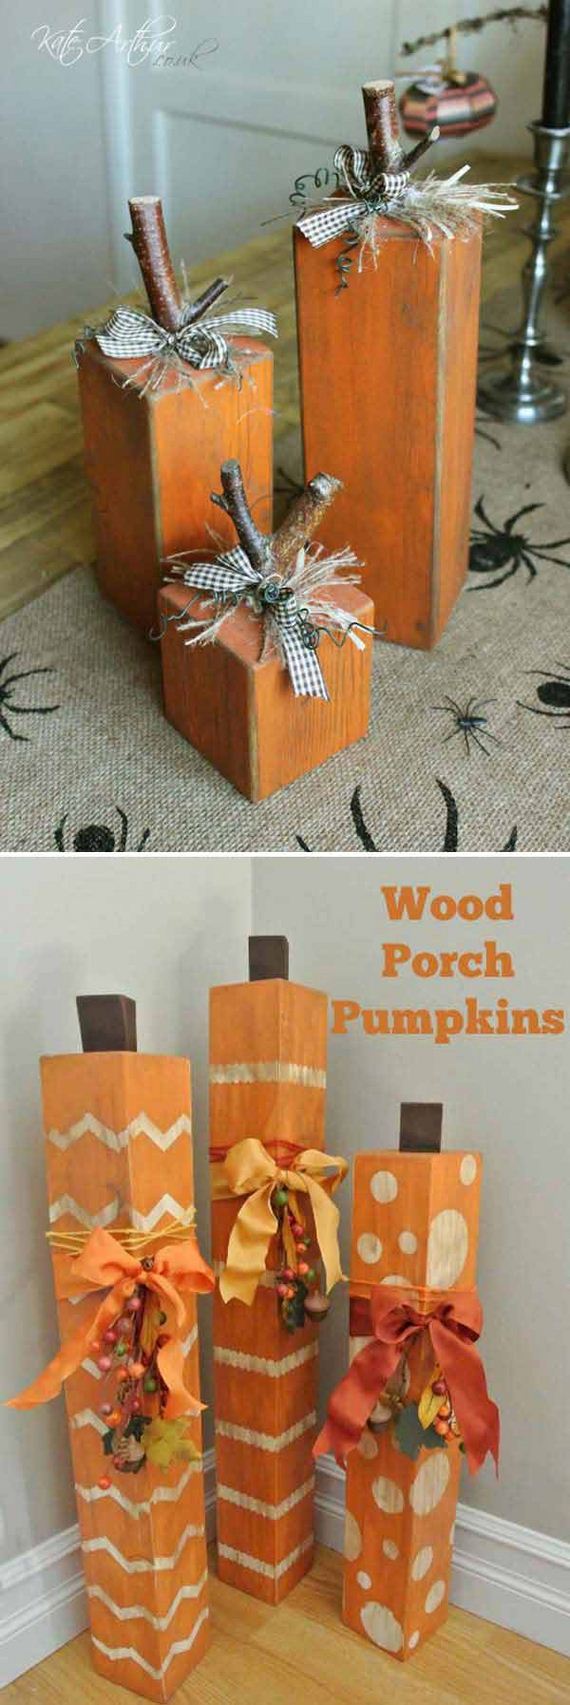 10-halloween-decorations-made-out-of-recycled-wood